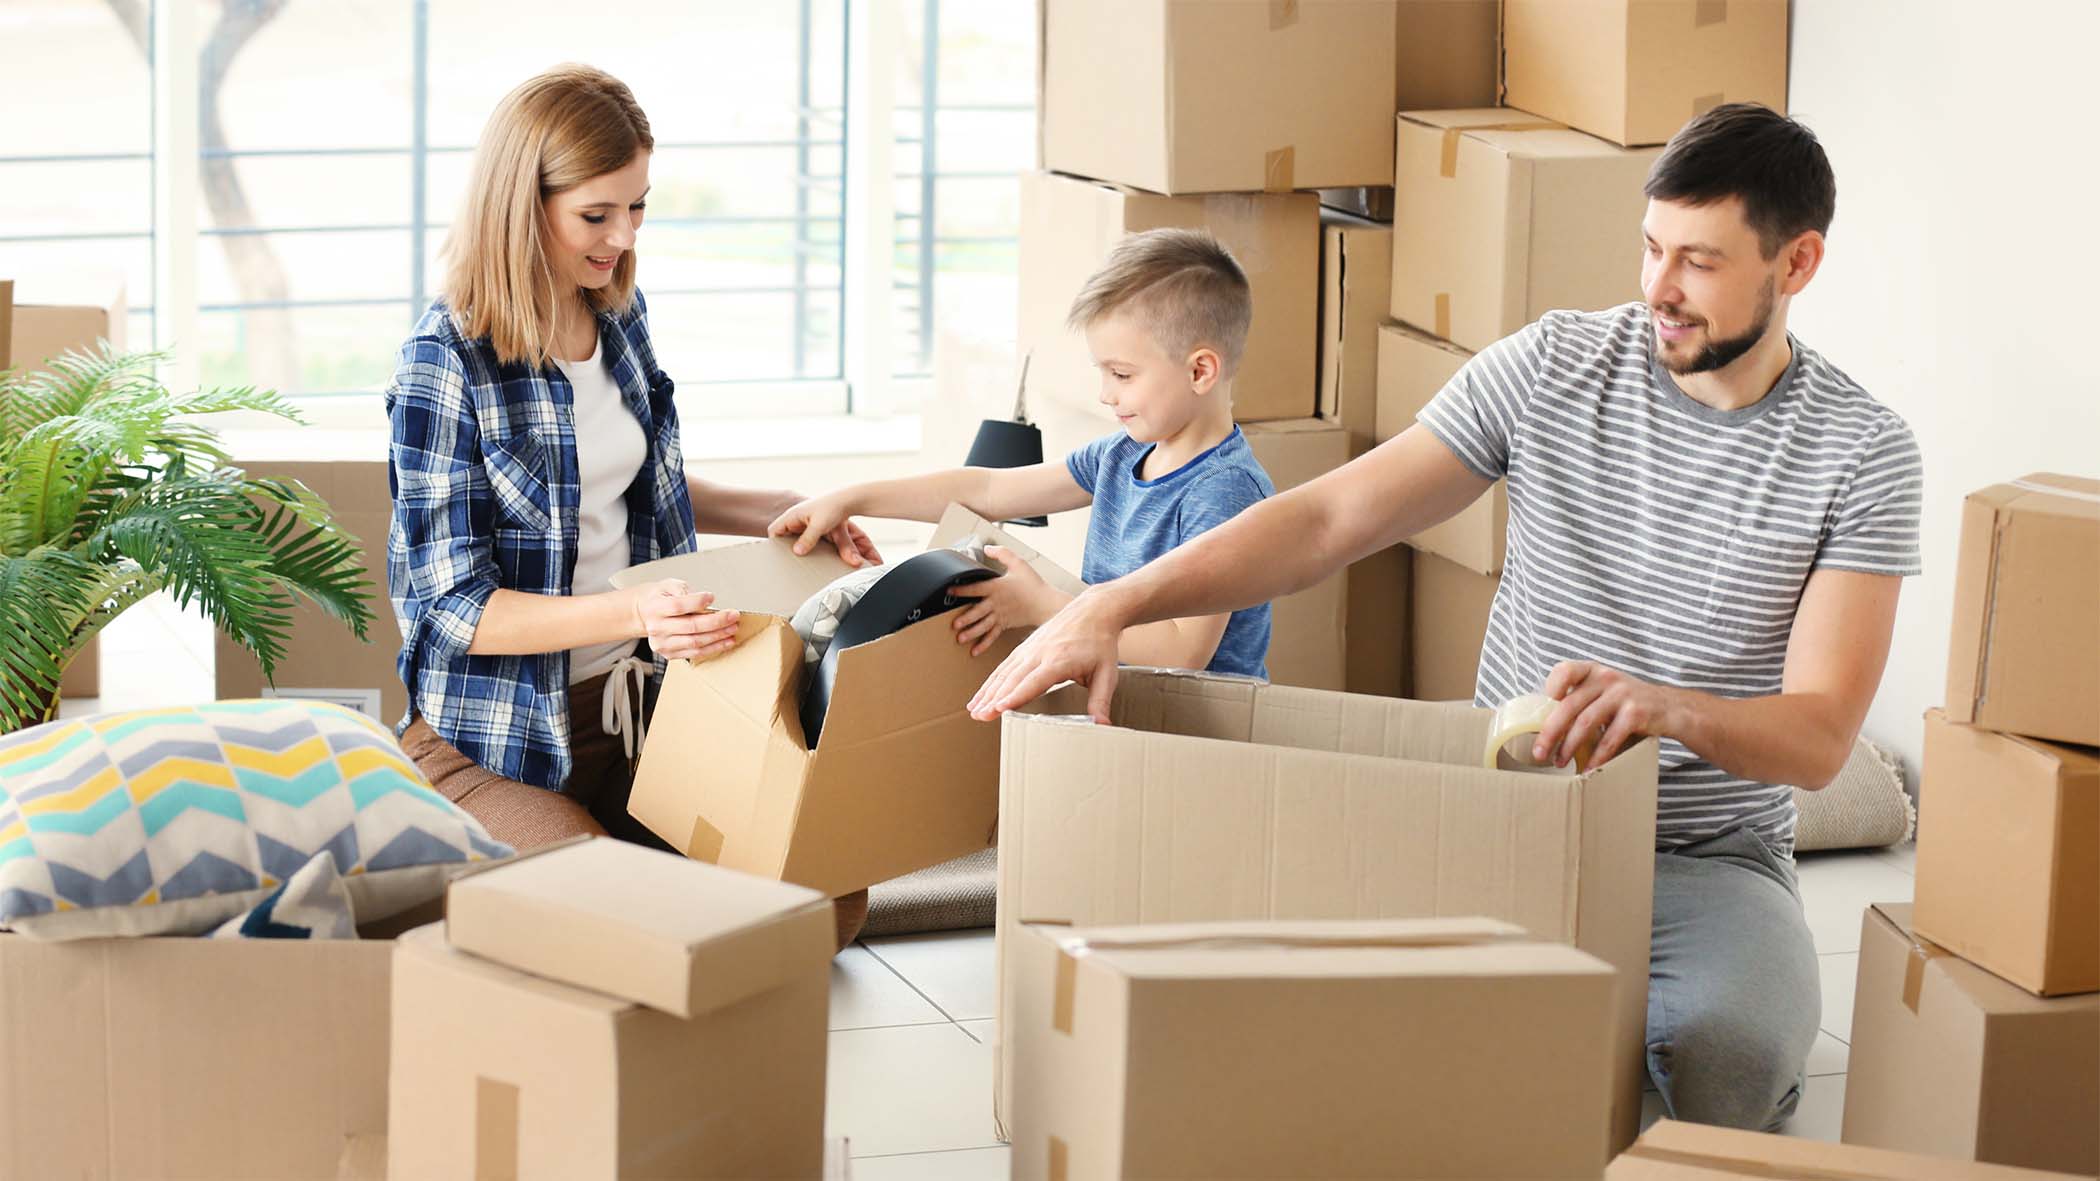 How To Pack Cardboard Boxes For Storage